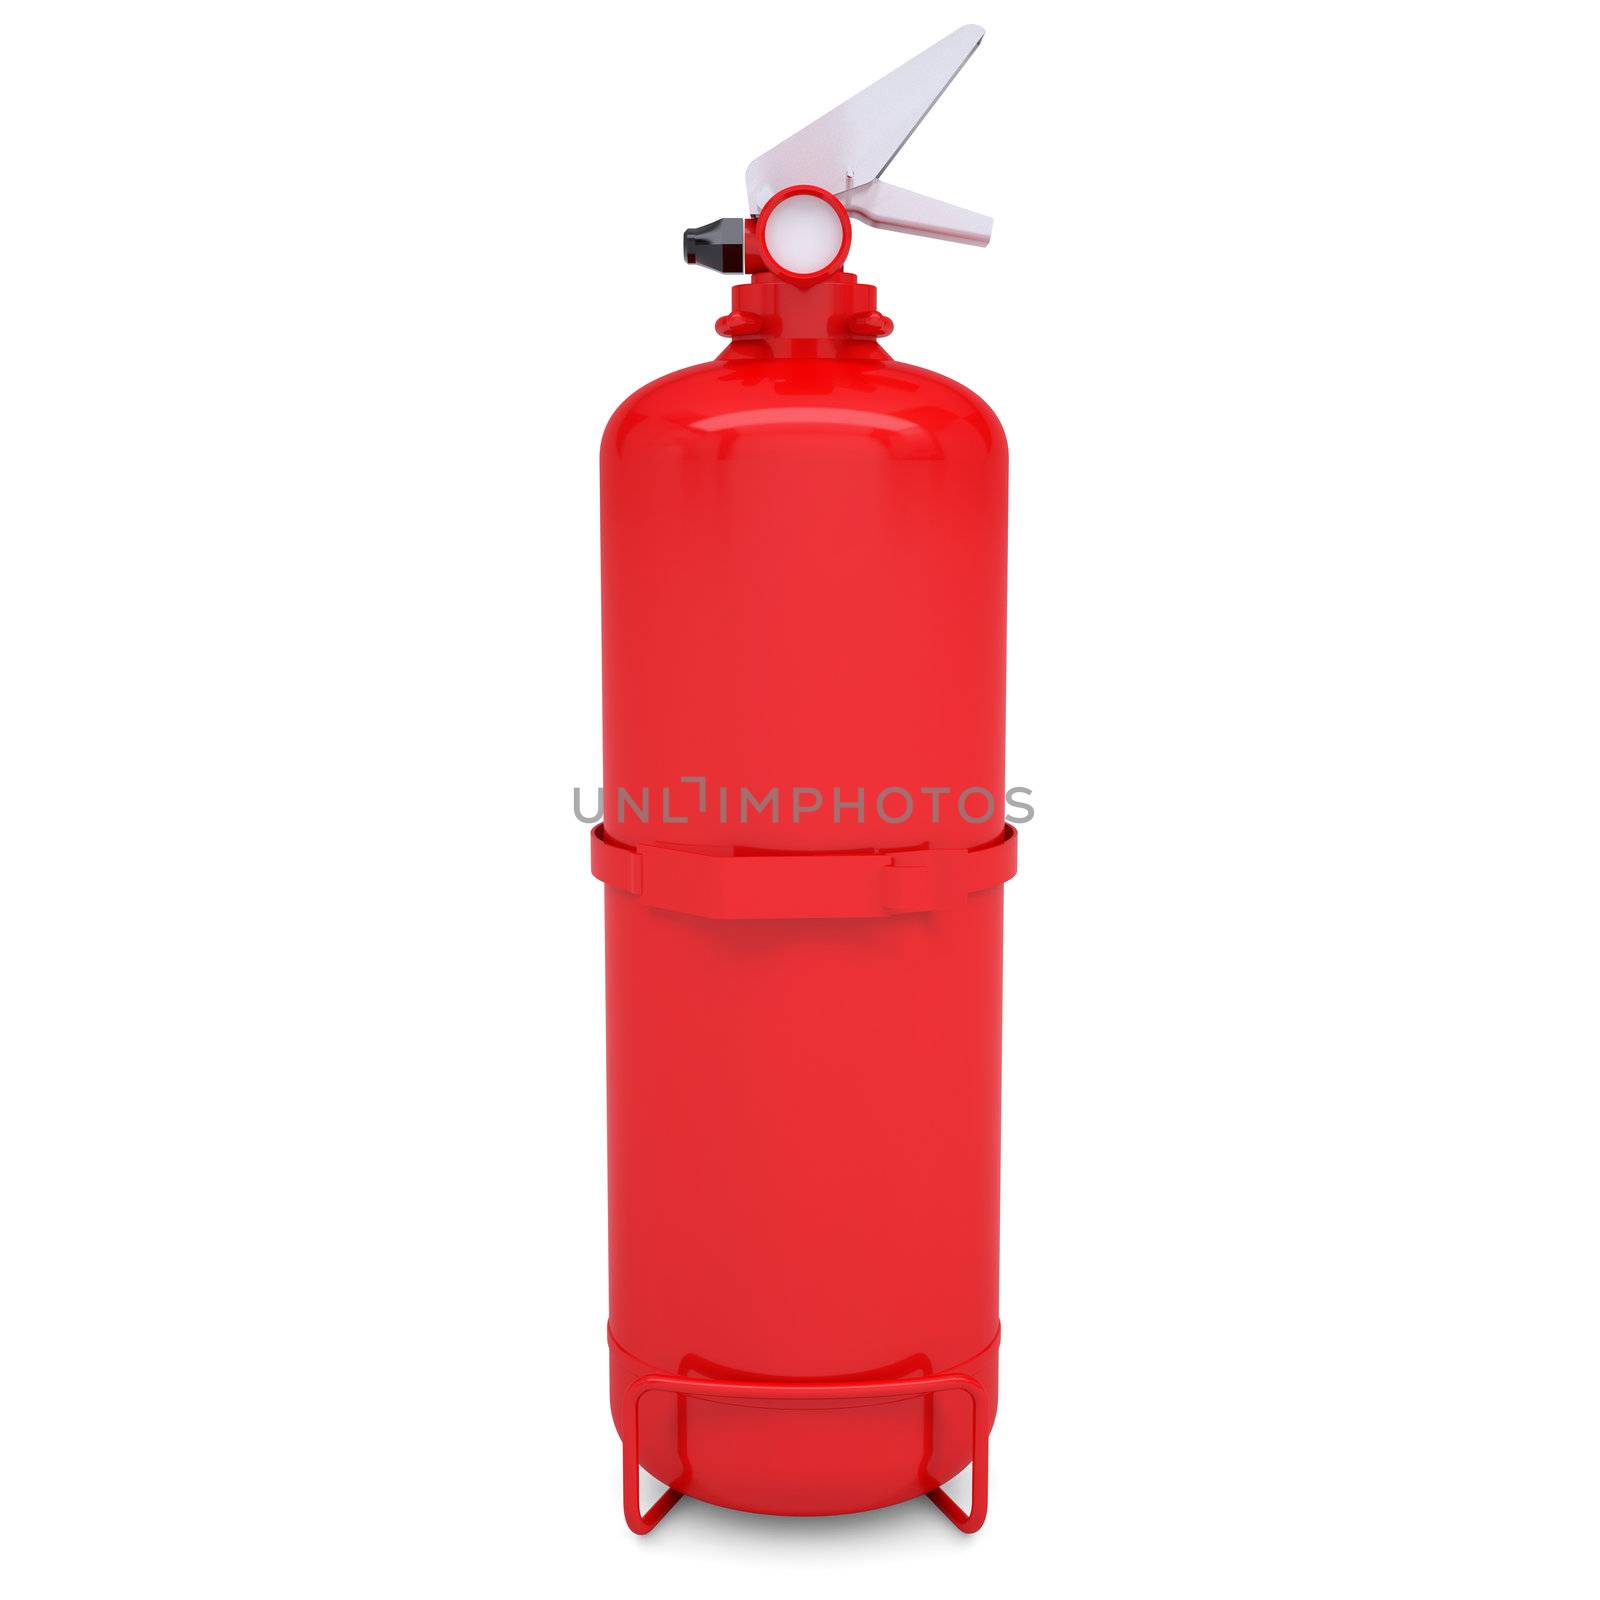 Red fire extinguisher. Isolated render on a white background